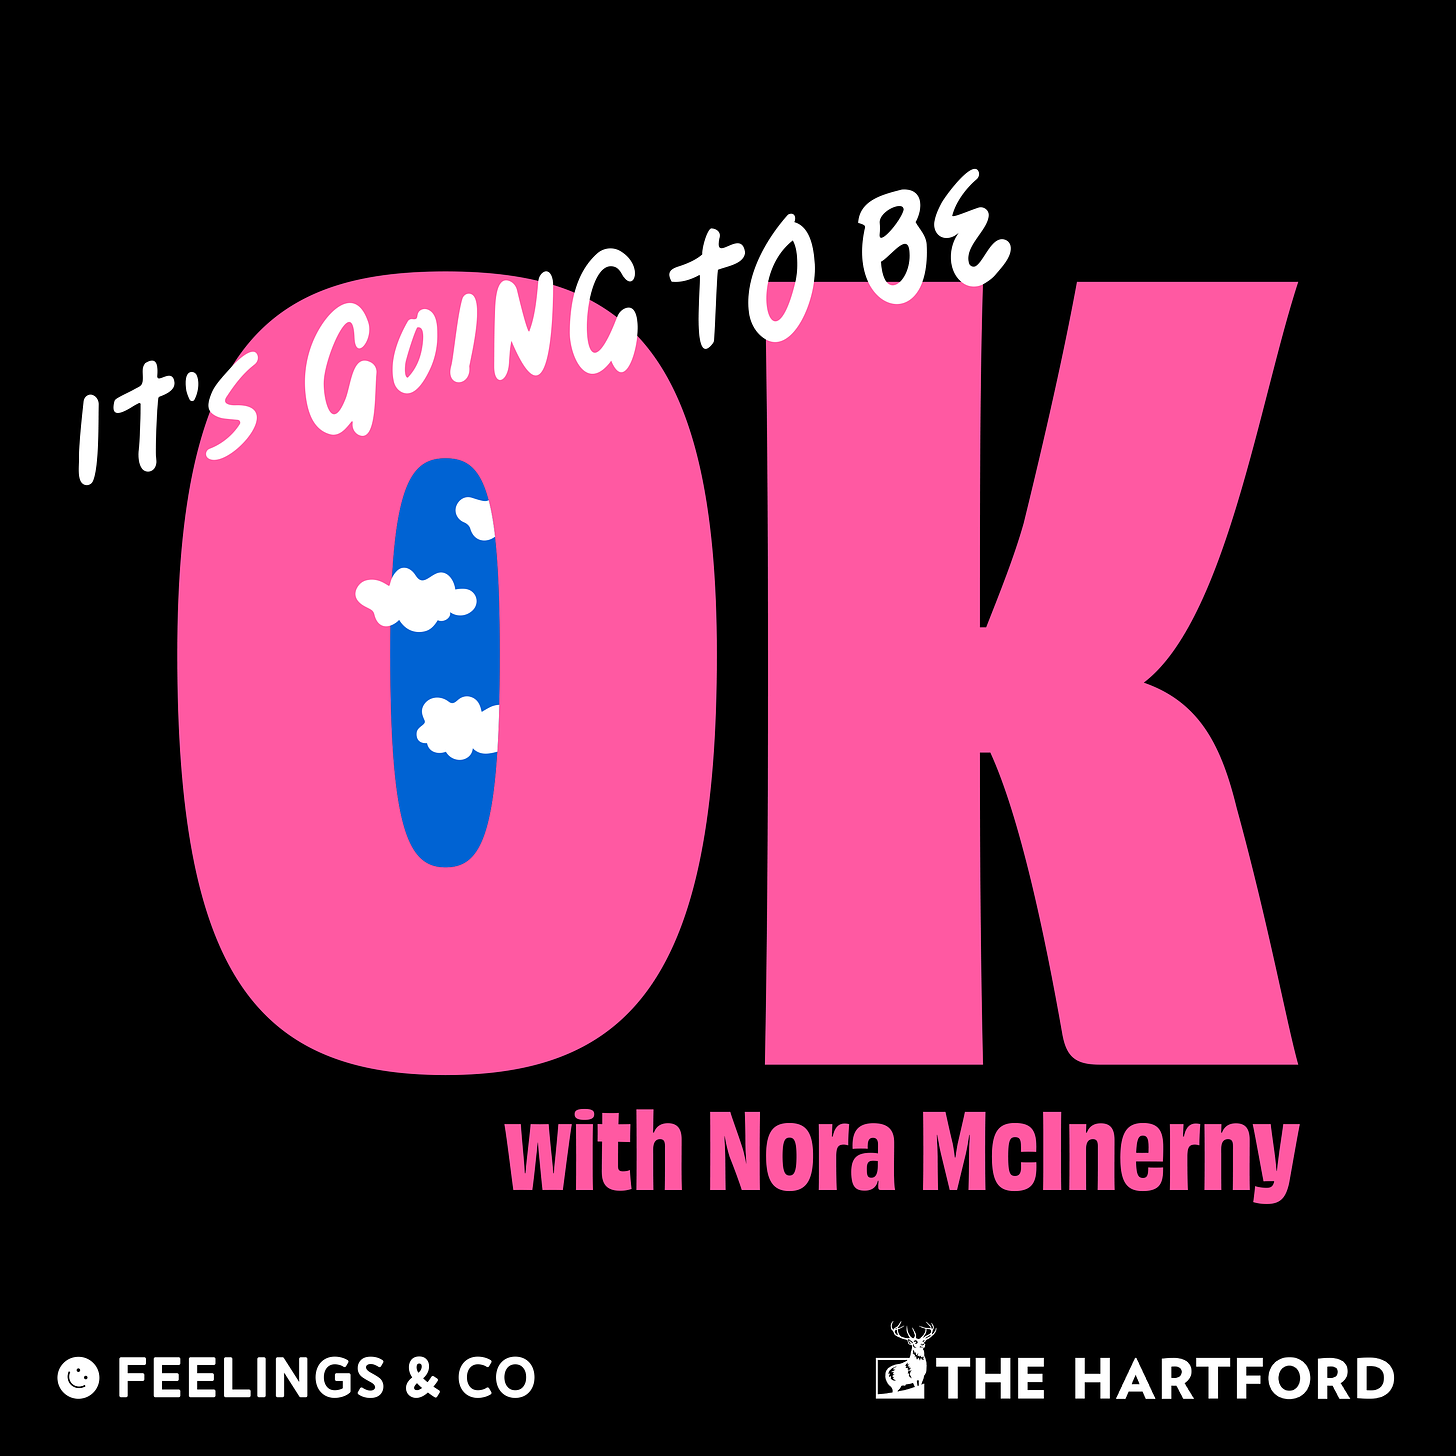 Podcast tile for "It's Going To Be Ok with Nora McInerny," a new podcast by Feelings & Co. The word "OK" is giant and bright pink, and inside the O are blue and white clouds.